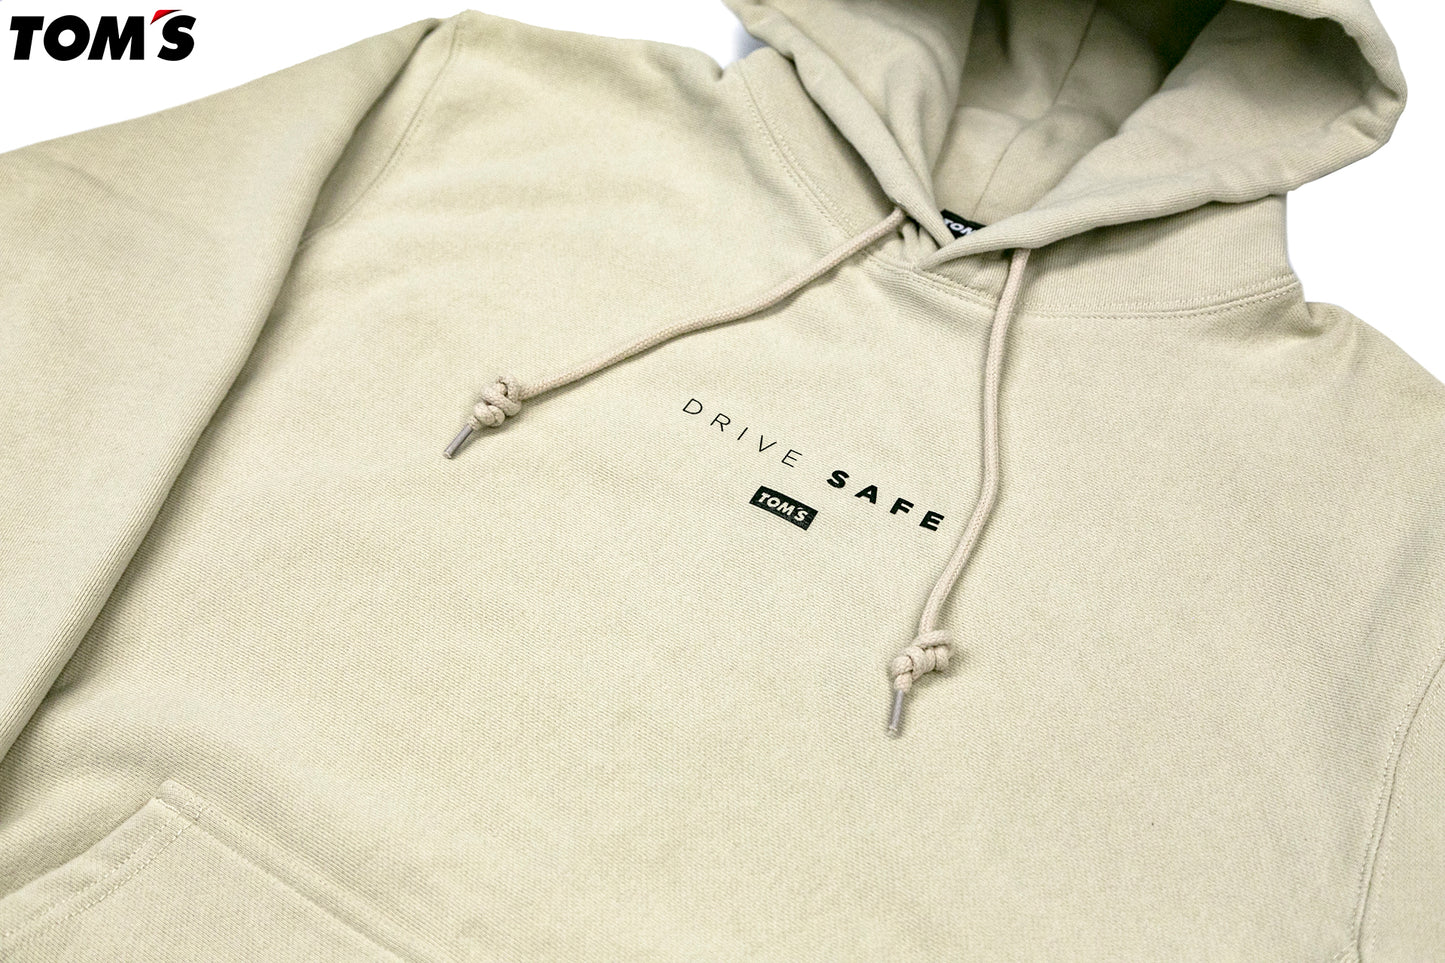 [Drive Safe] Toms Pull Over Beige Hoodie